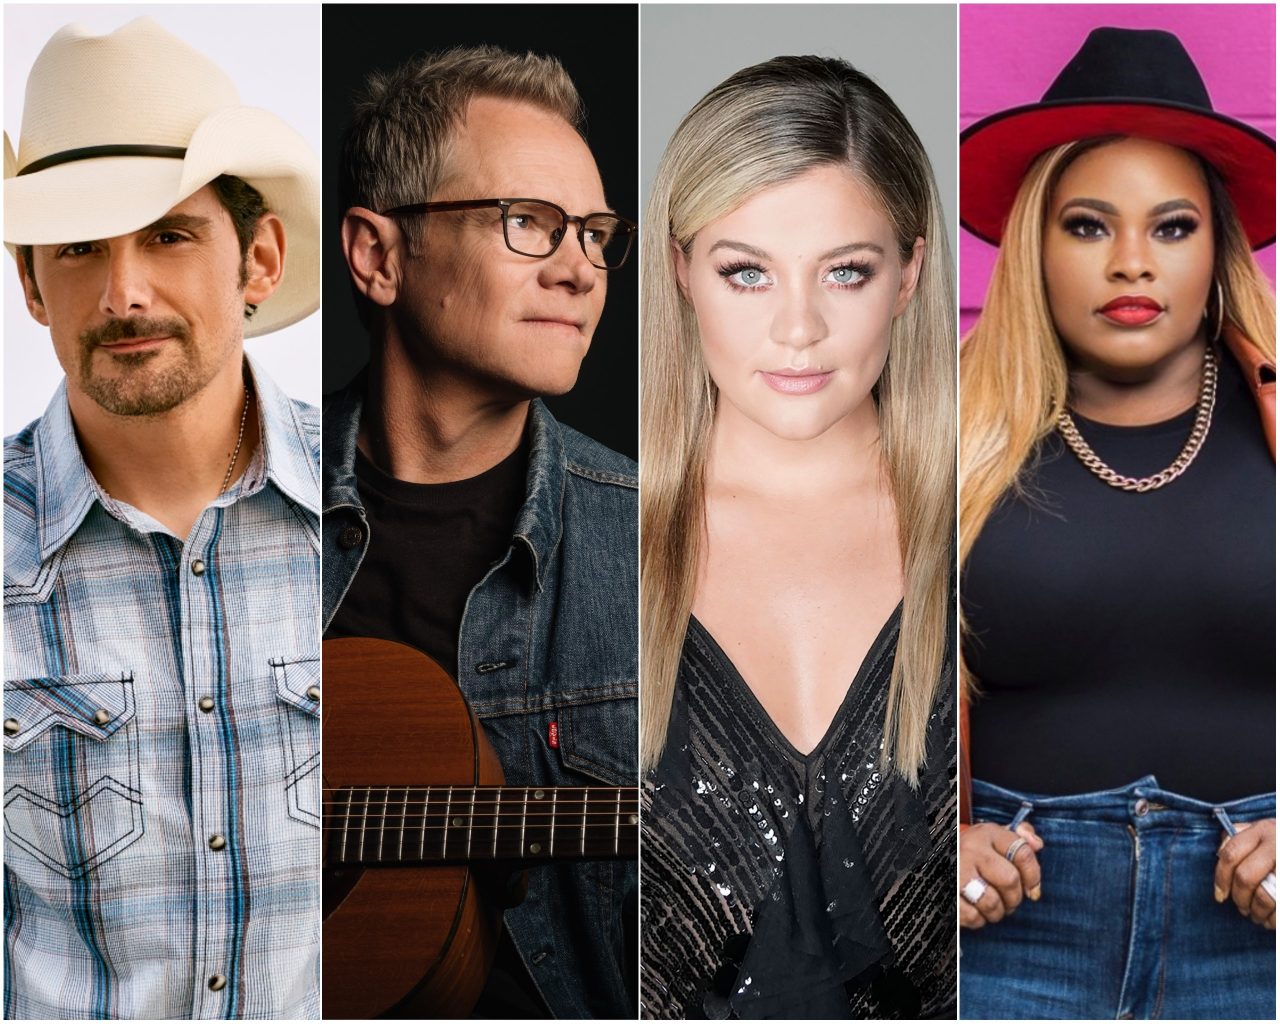 Steven Curtis Chapman, Brad Paisley and More Come ‘Together’ in Song